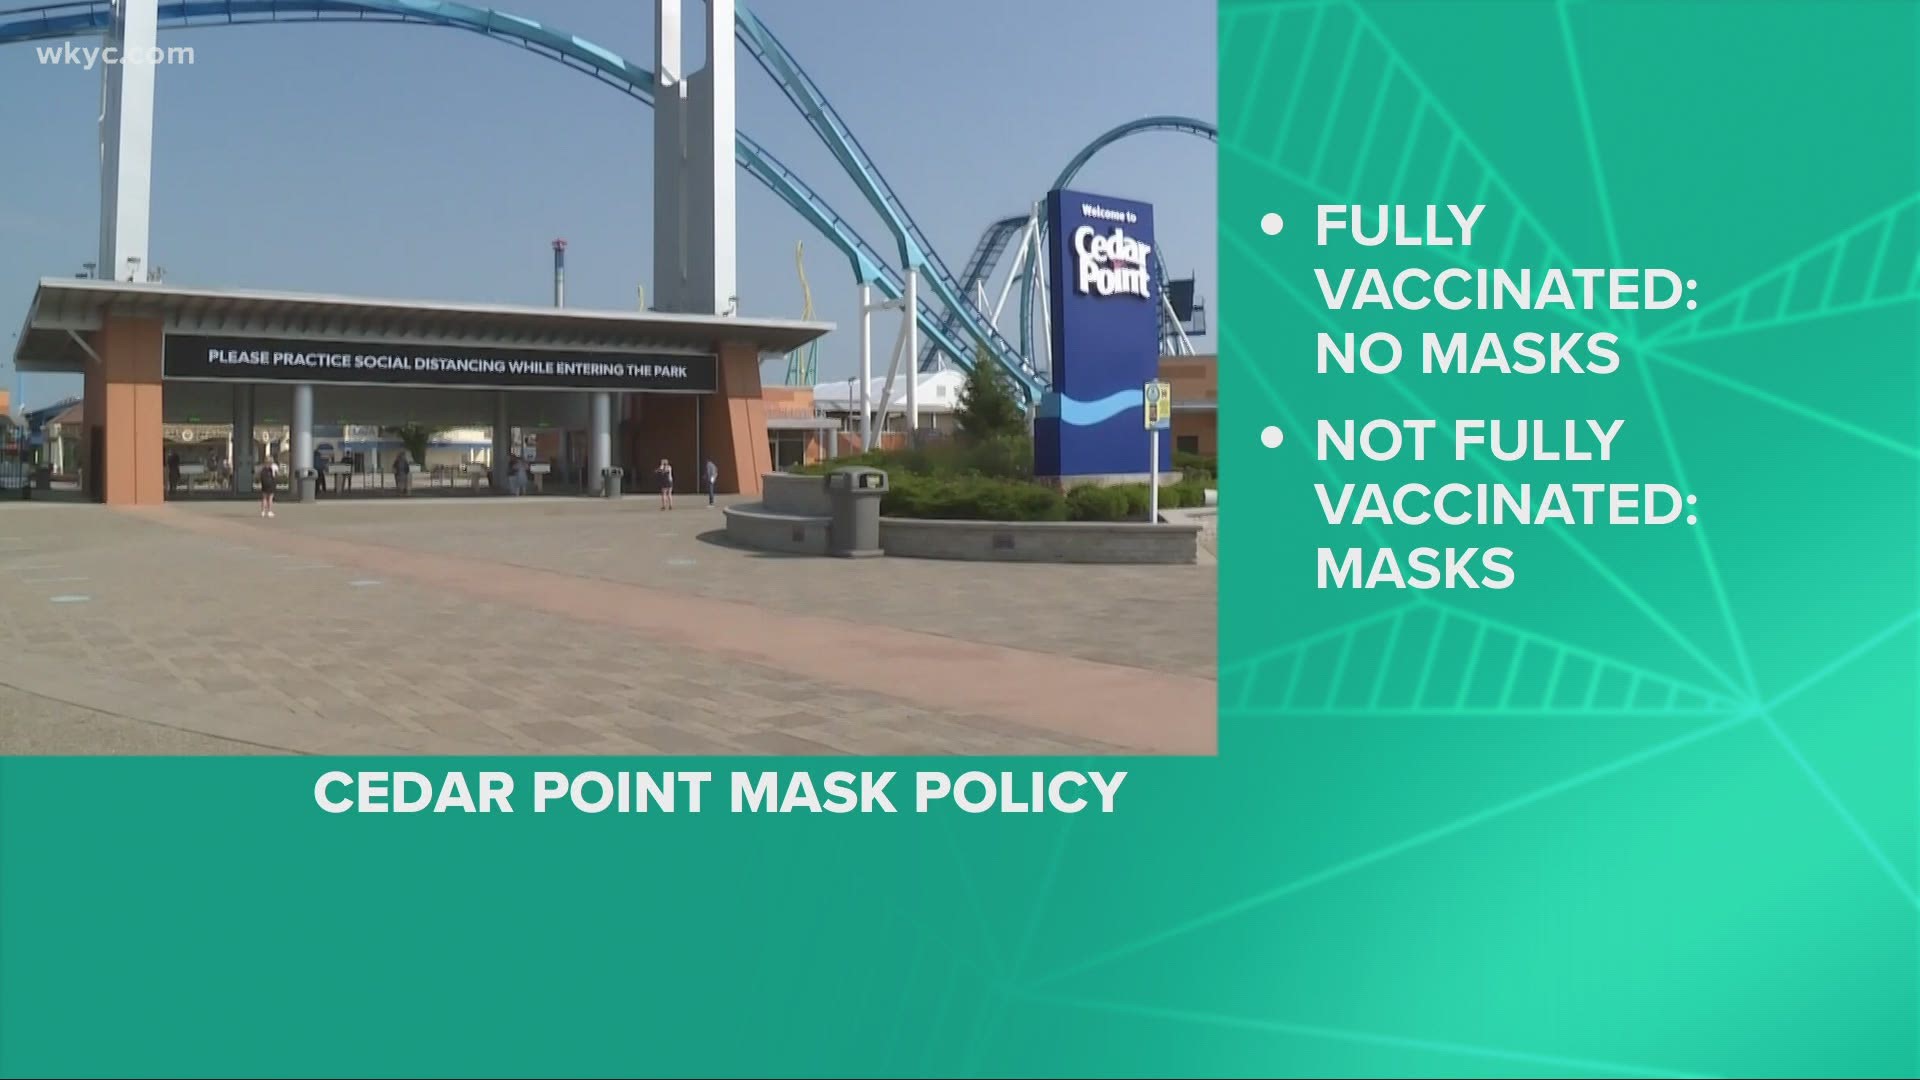 Cedar Point has removed mask requirements for fully vaccinated guests.